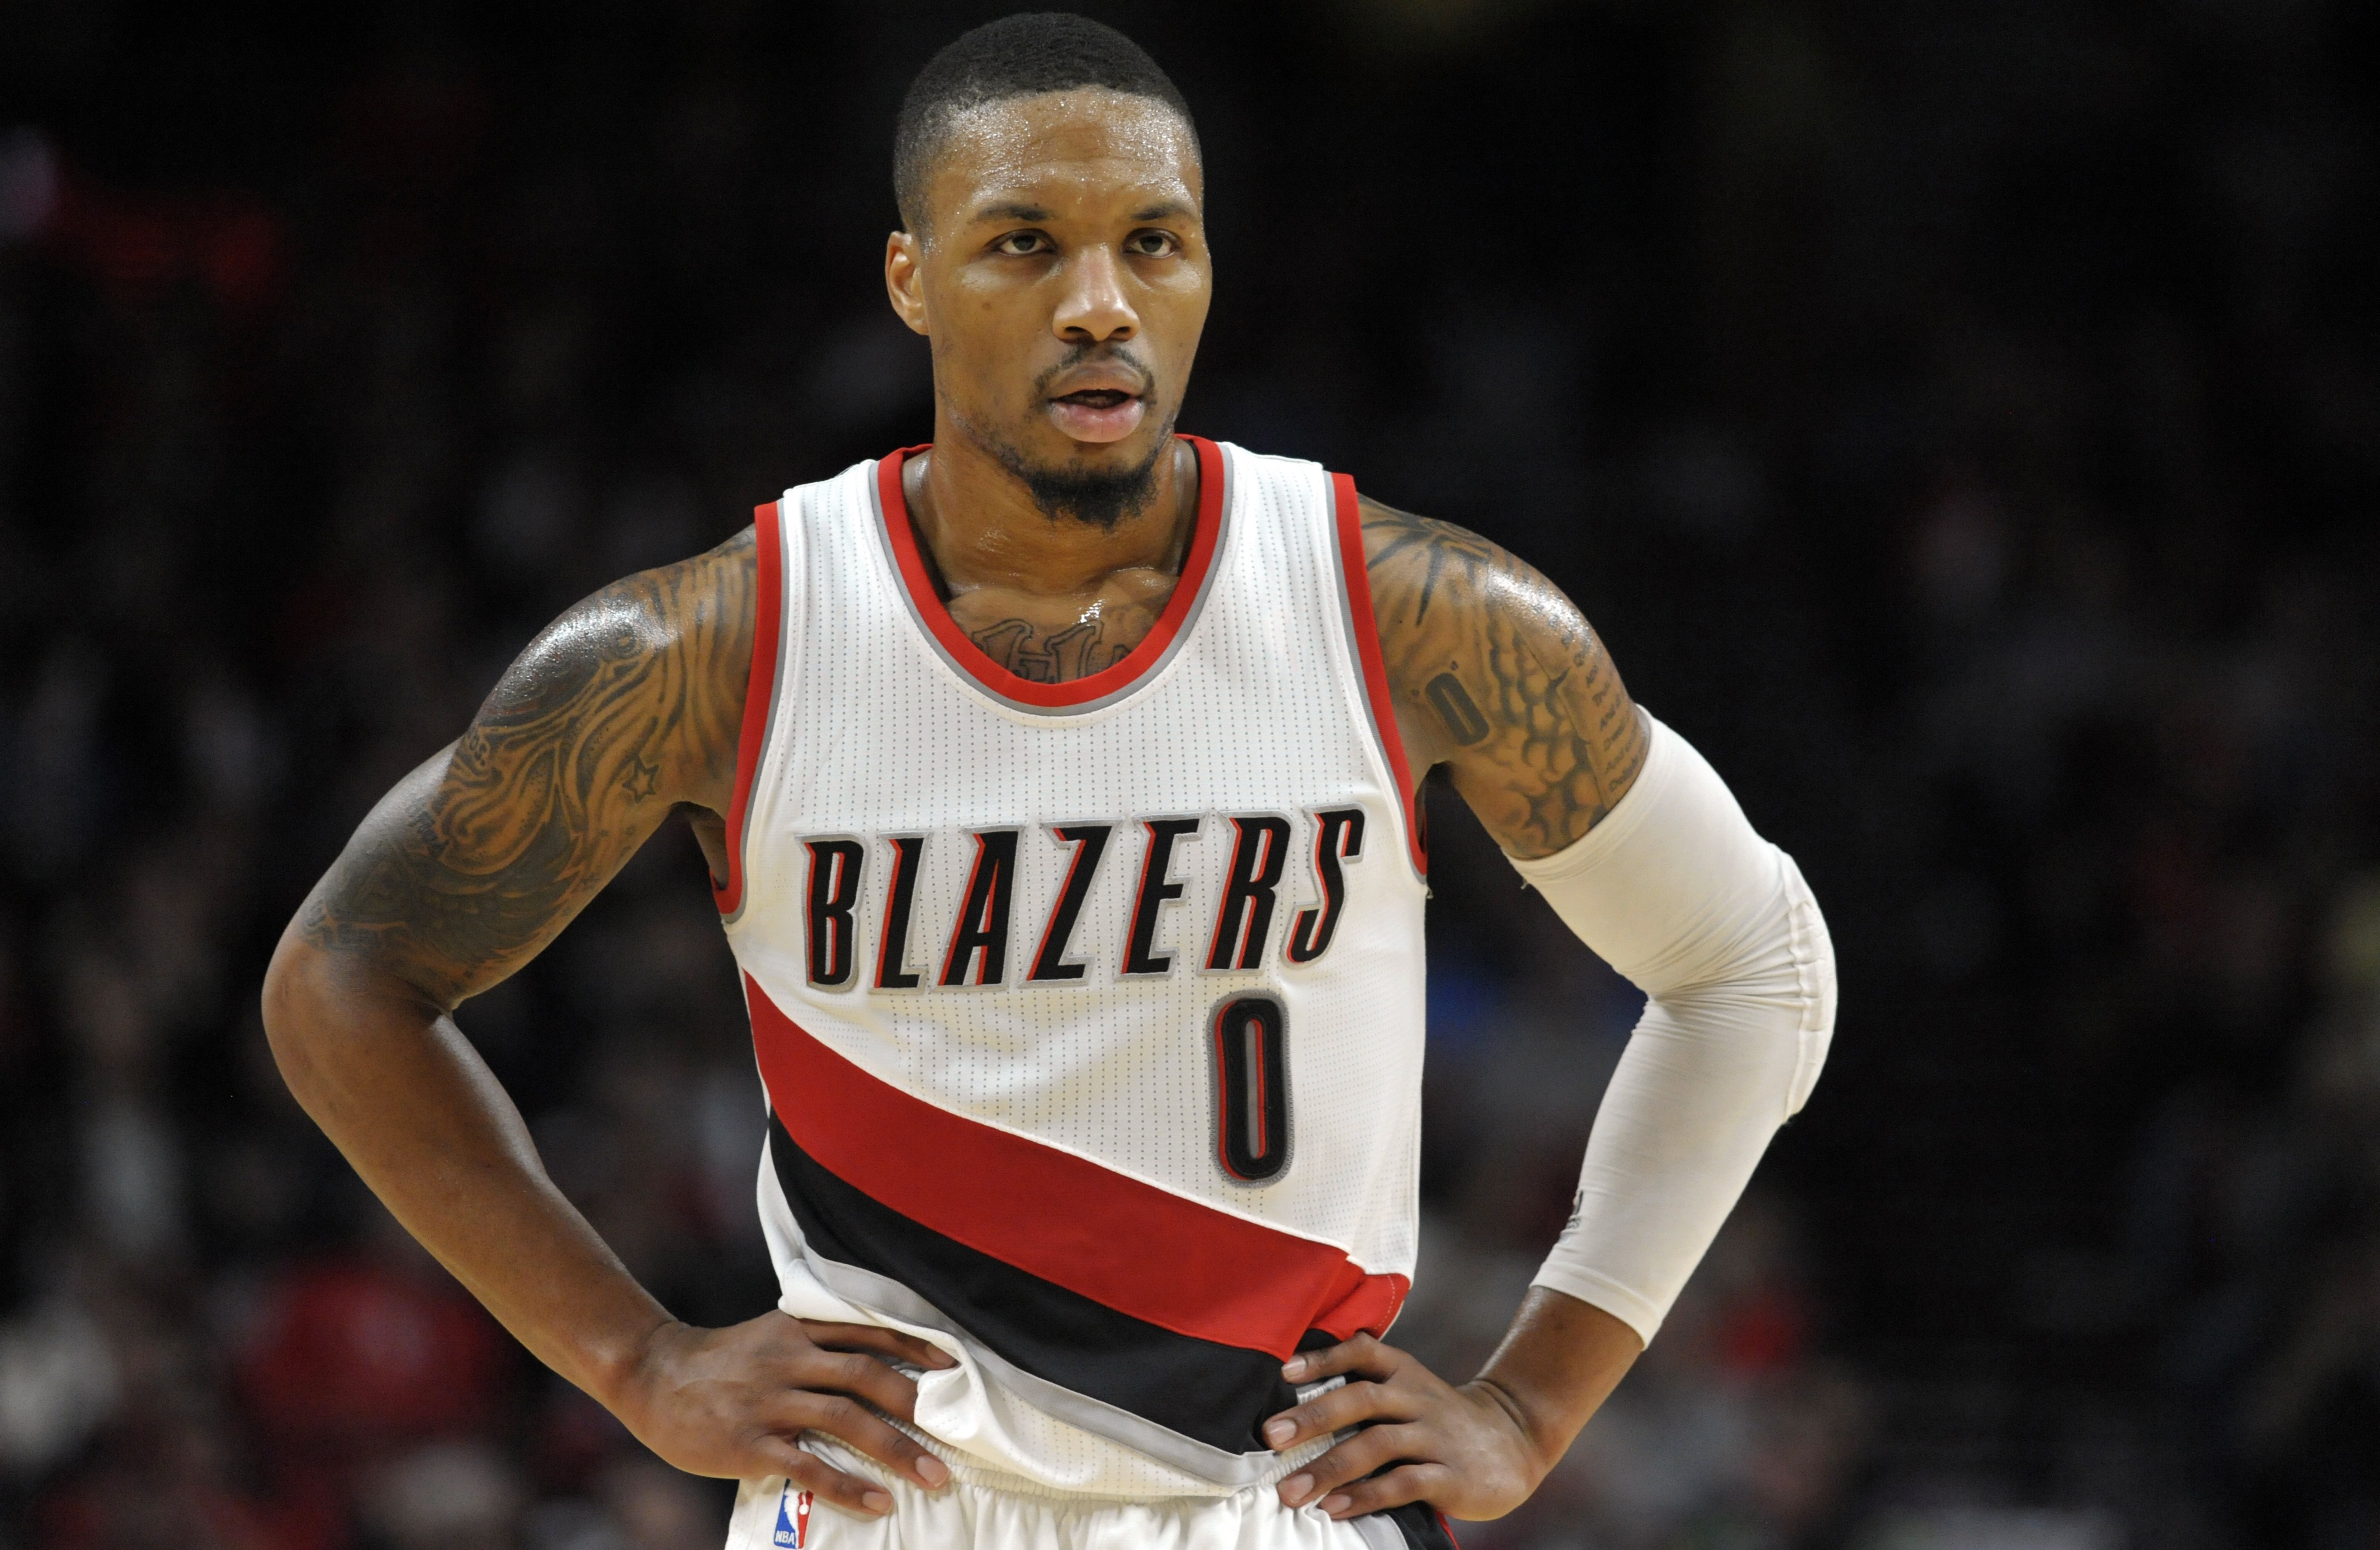 Portland Trail Blazers’ Summer League schedule and roster (so far)